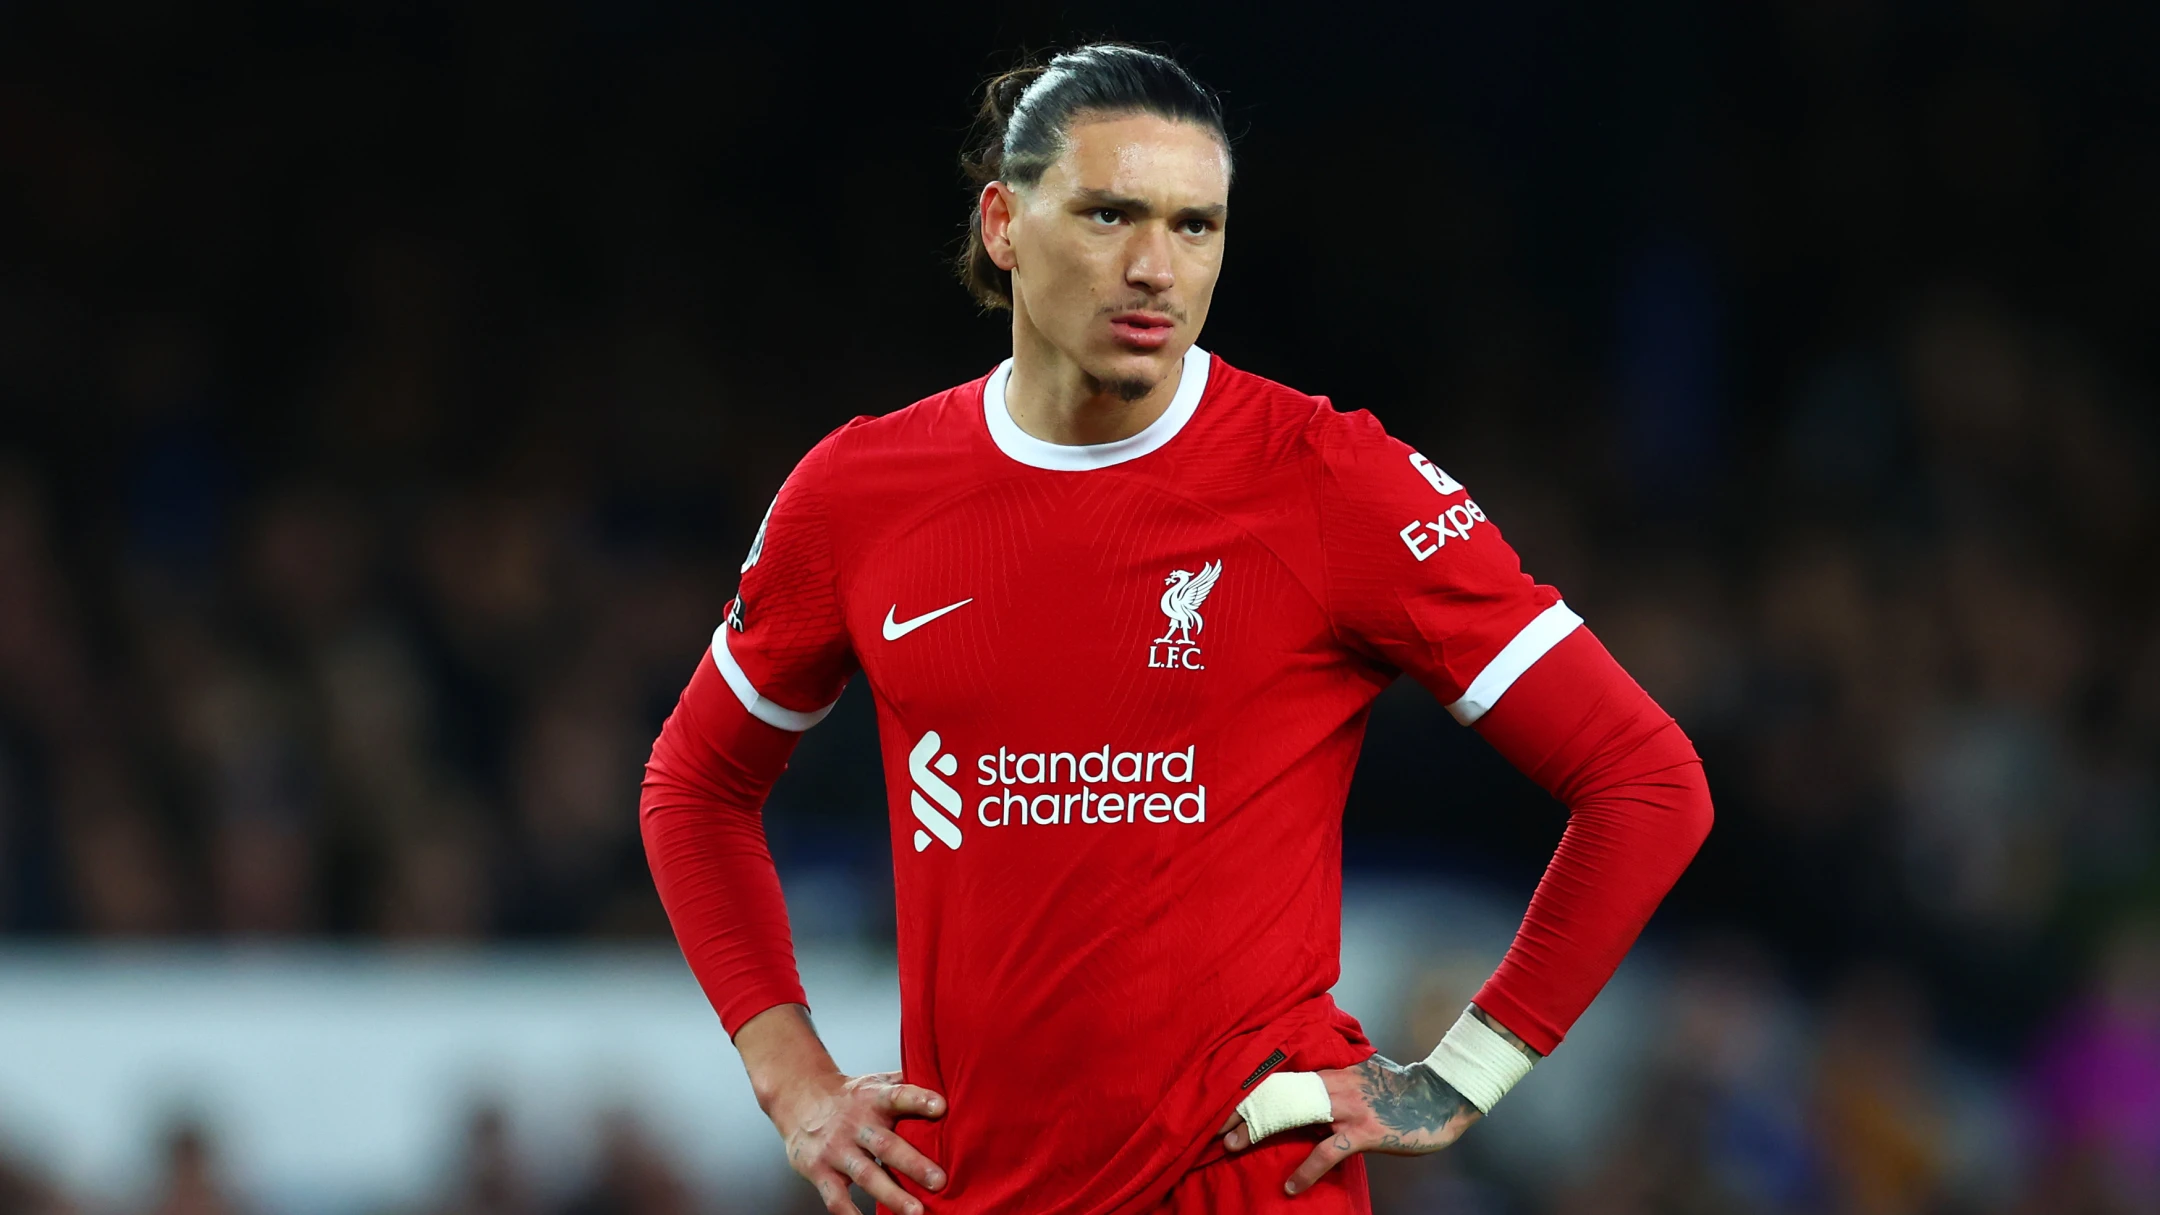 Darwin Nunez no longer looks at comments on social media Forward deleted all Liverpool content from his Instagram "Whoever says negative comments do not affect them is lying"